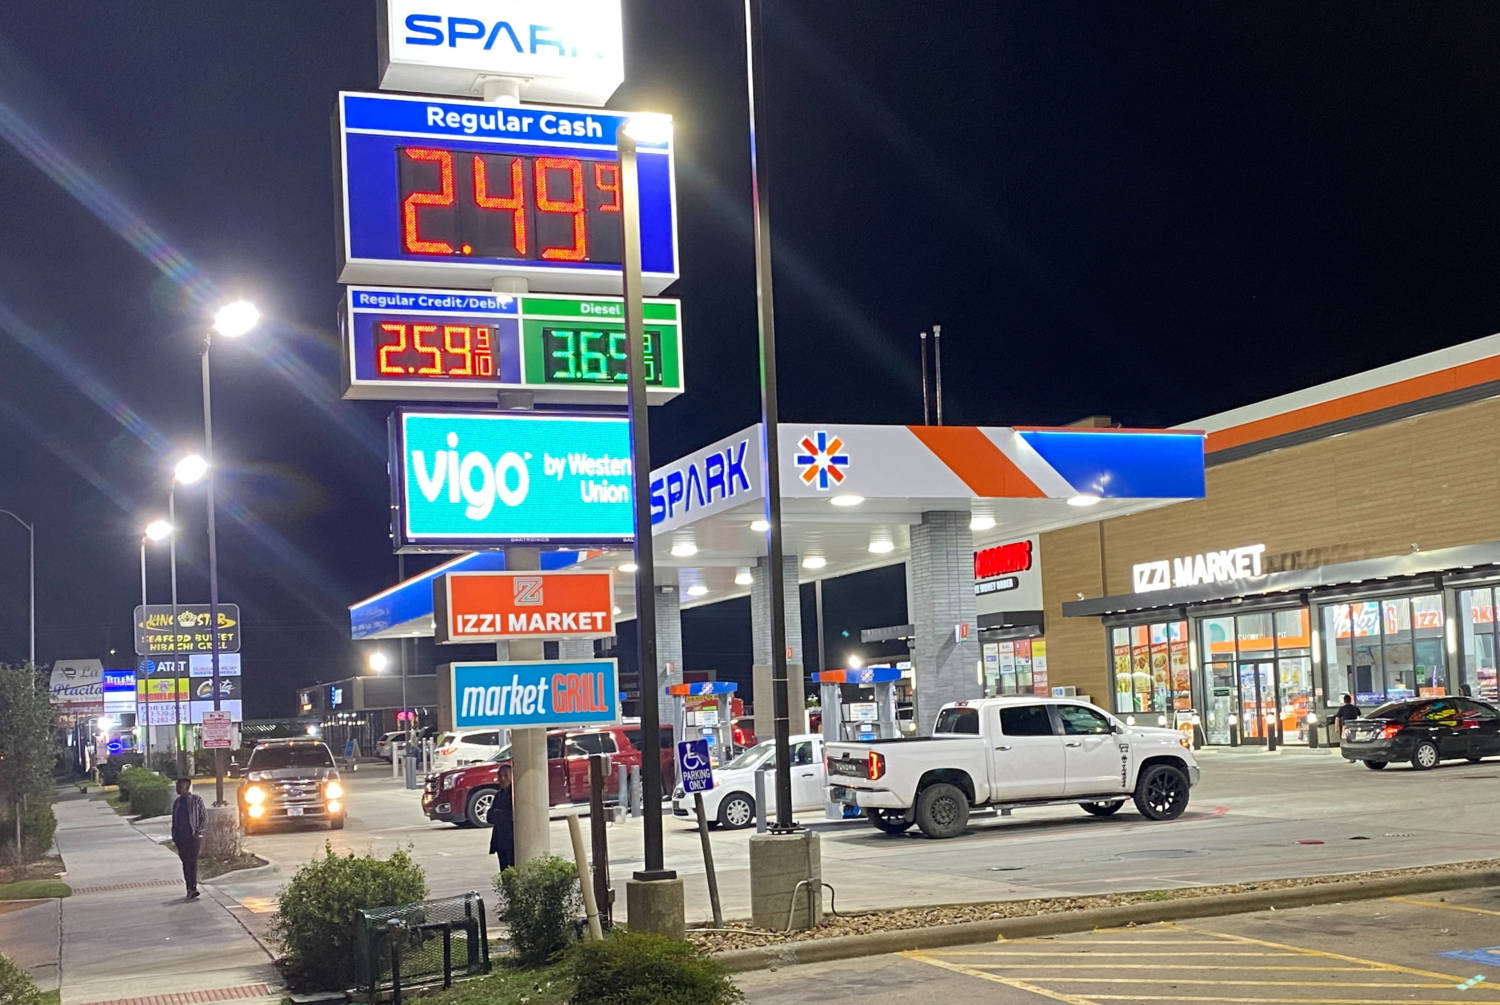 Signage Shows The Price Of Unleaded Regular Gas At Less Than $2.50 Per Gallon, In Houston